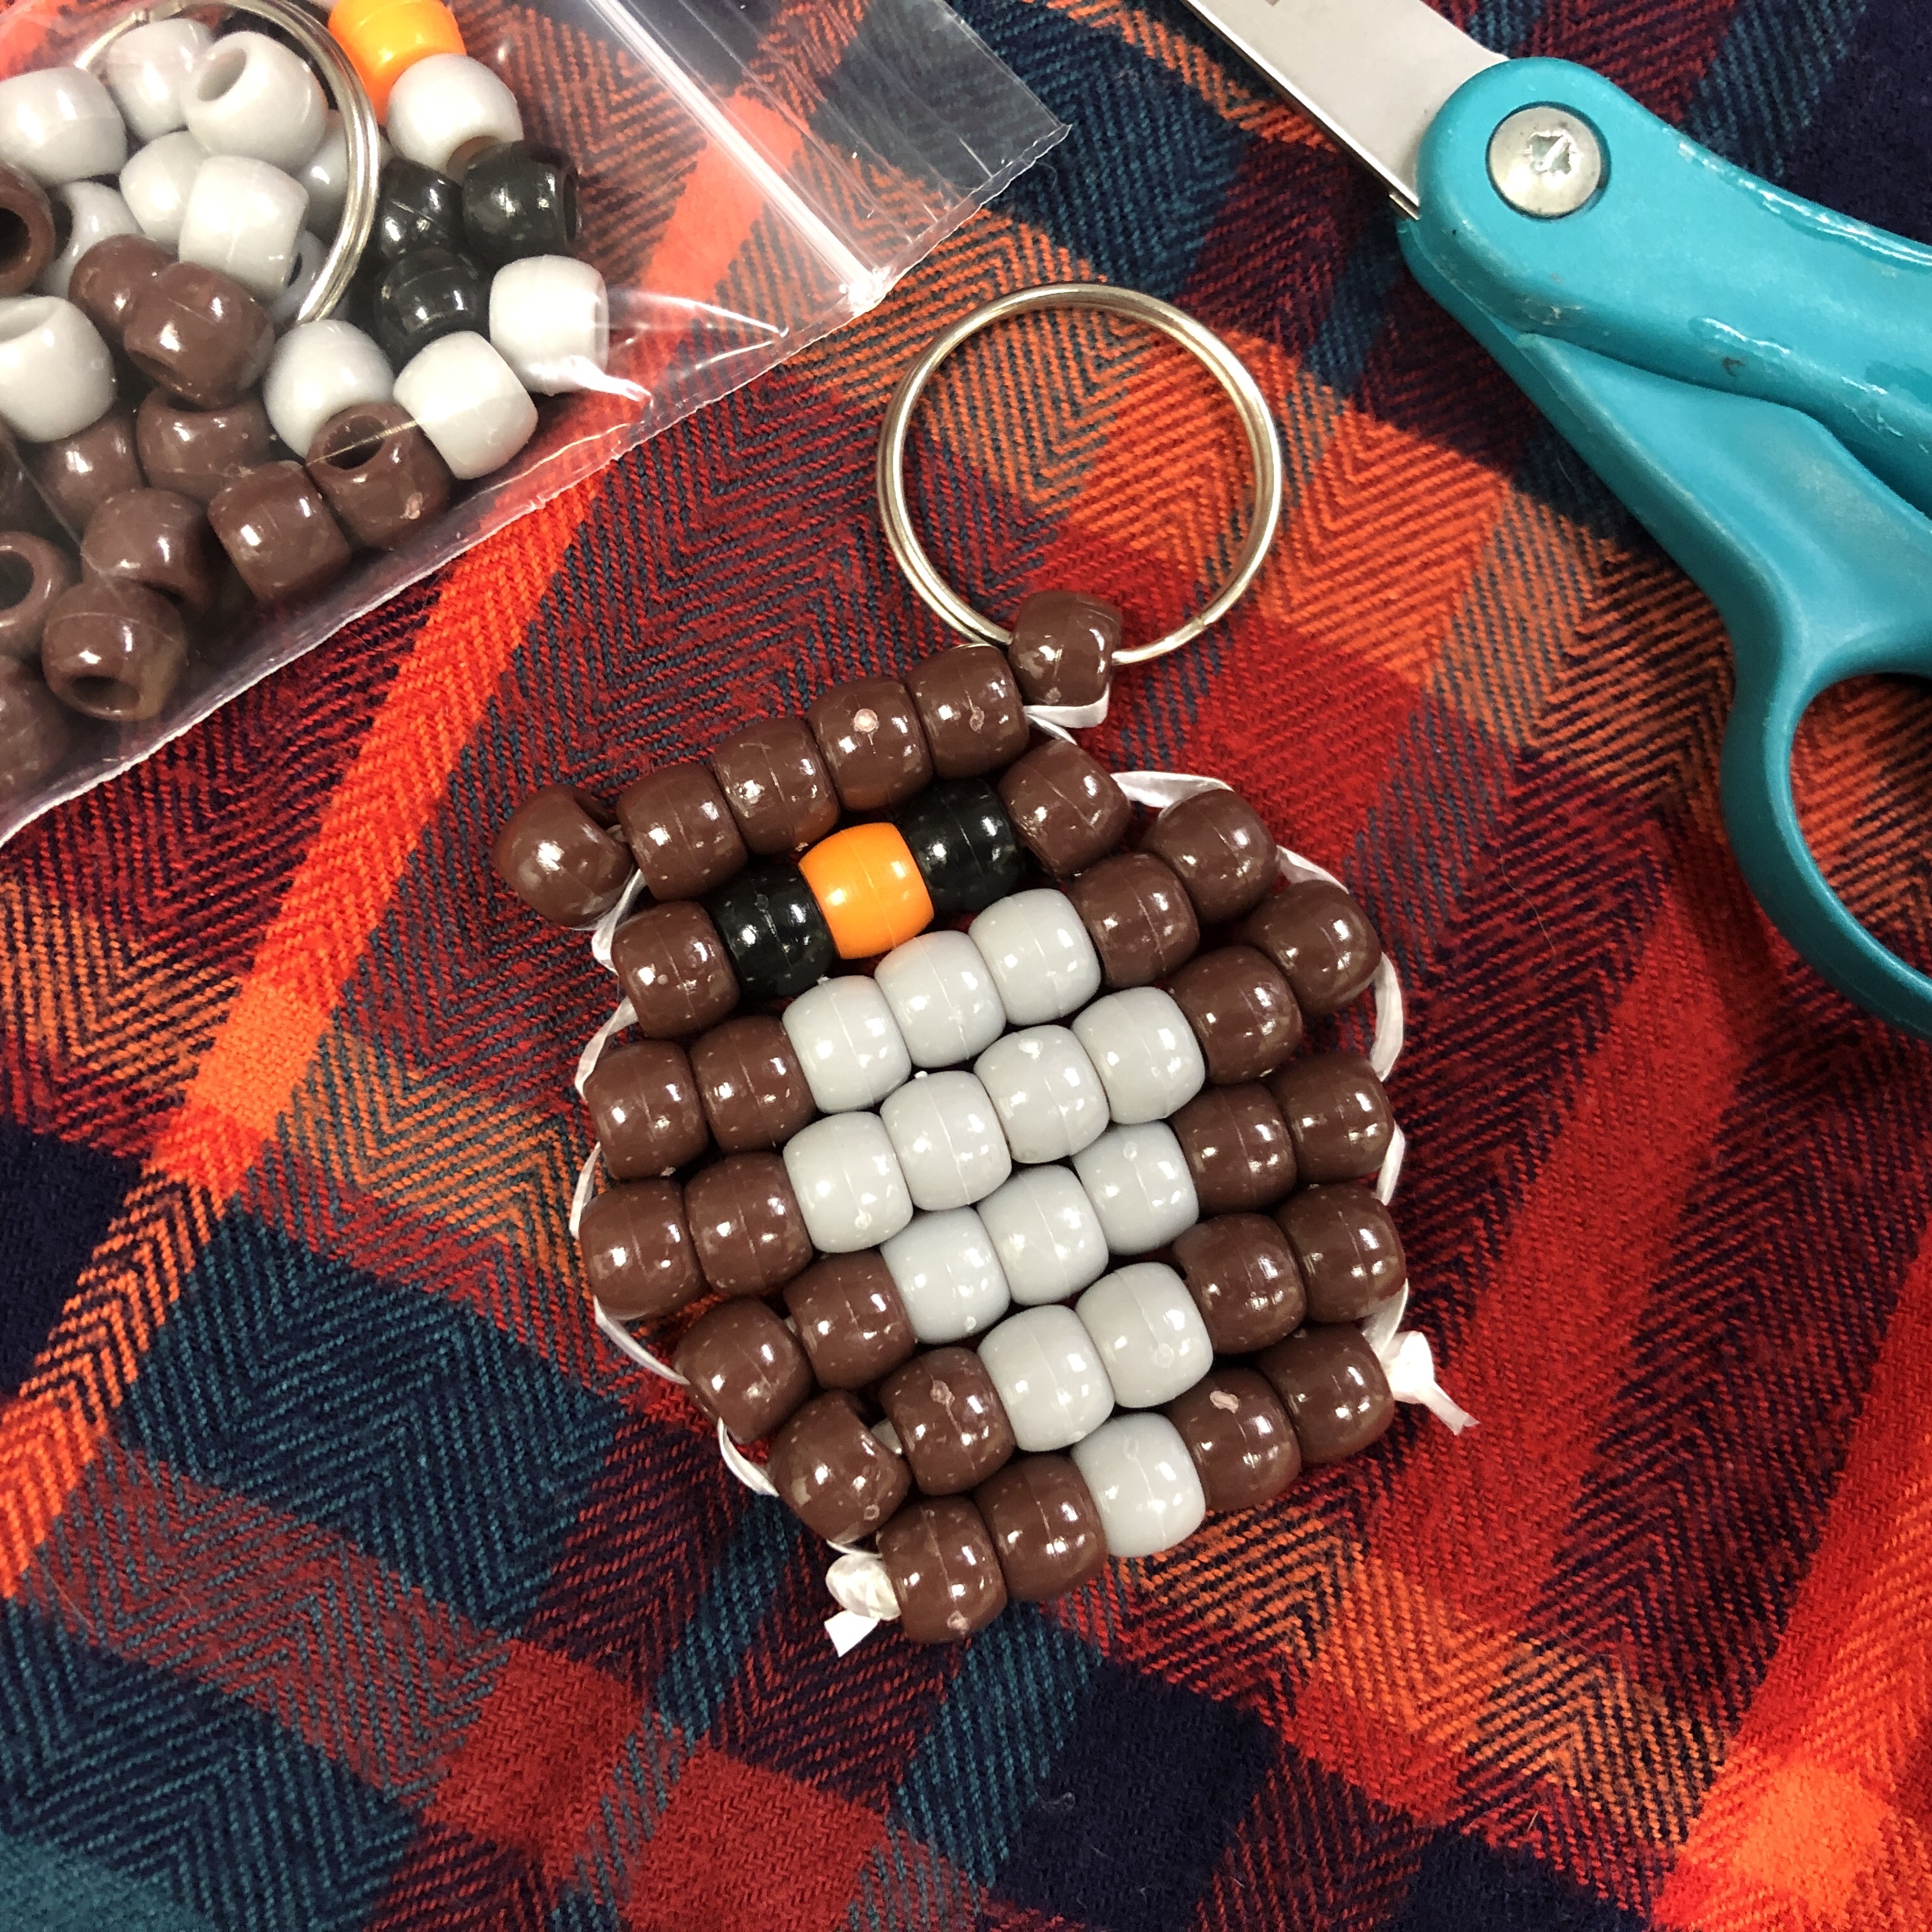 Image of beaded owl on plaid blanket with bag of beads and scissors nearby.